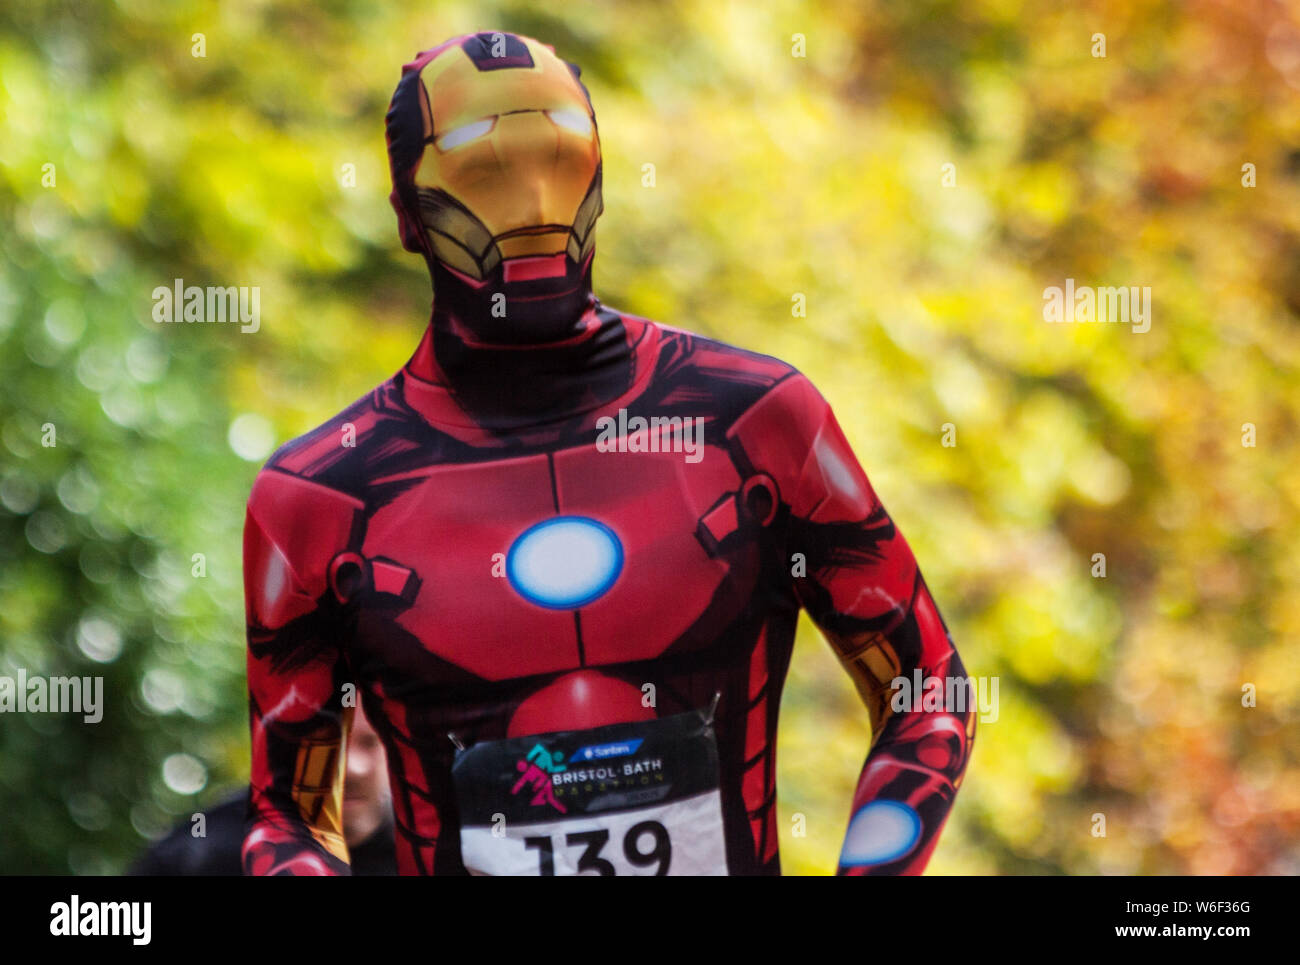 Runner in hilarious fancy dress costume during a charity running event. Stock Photo